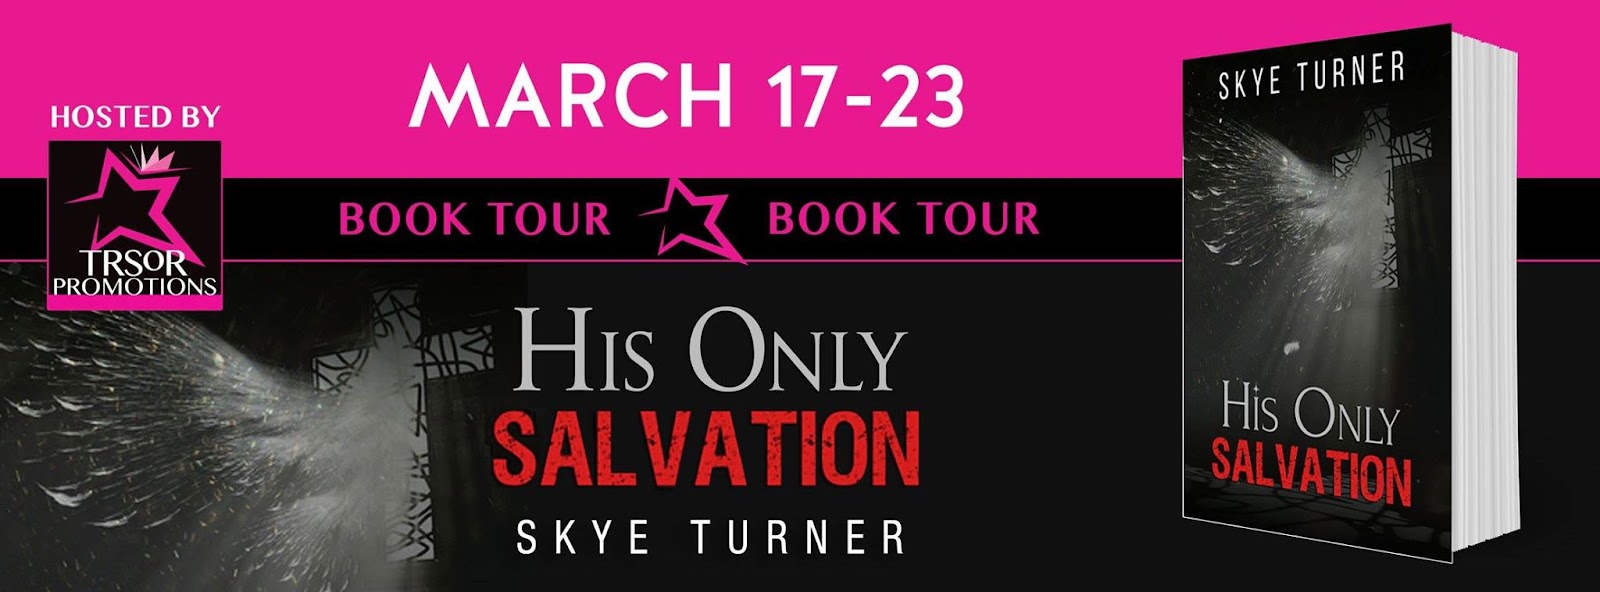 his only salvation book tour.jpg